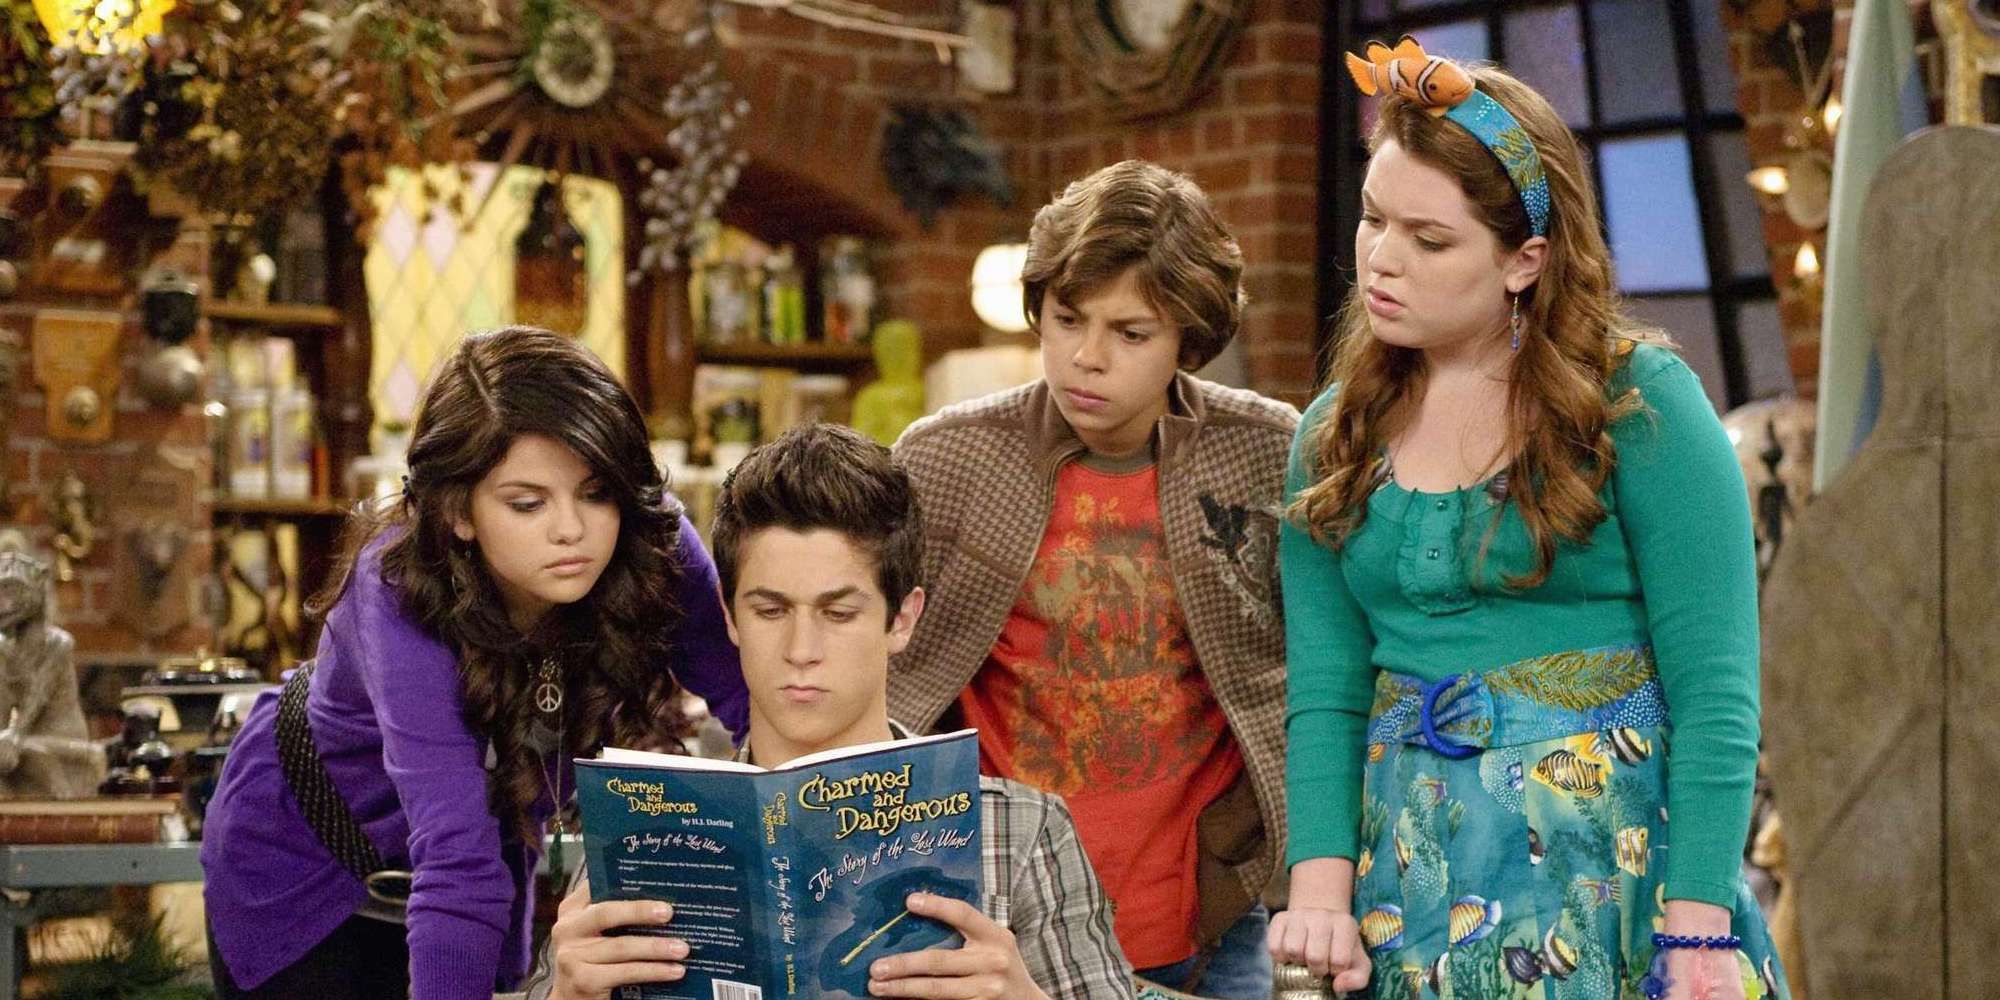 What Happened To The Wizards Of Waverly Place Cast